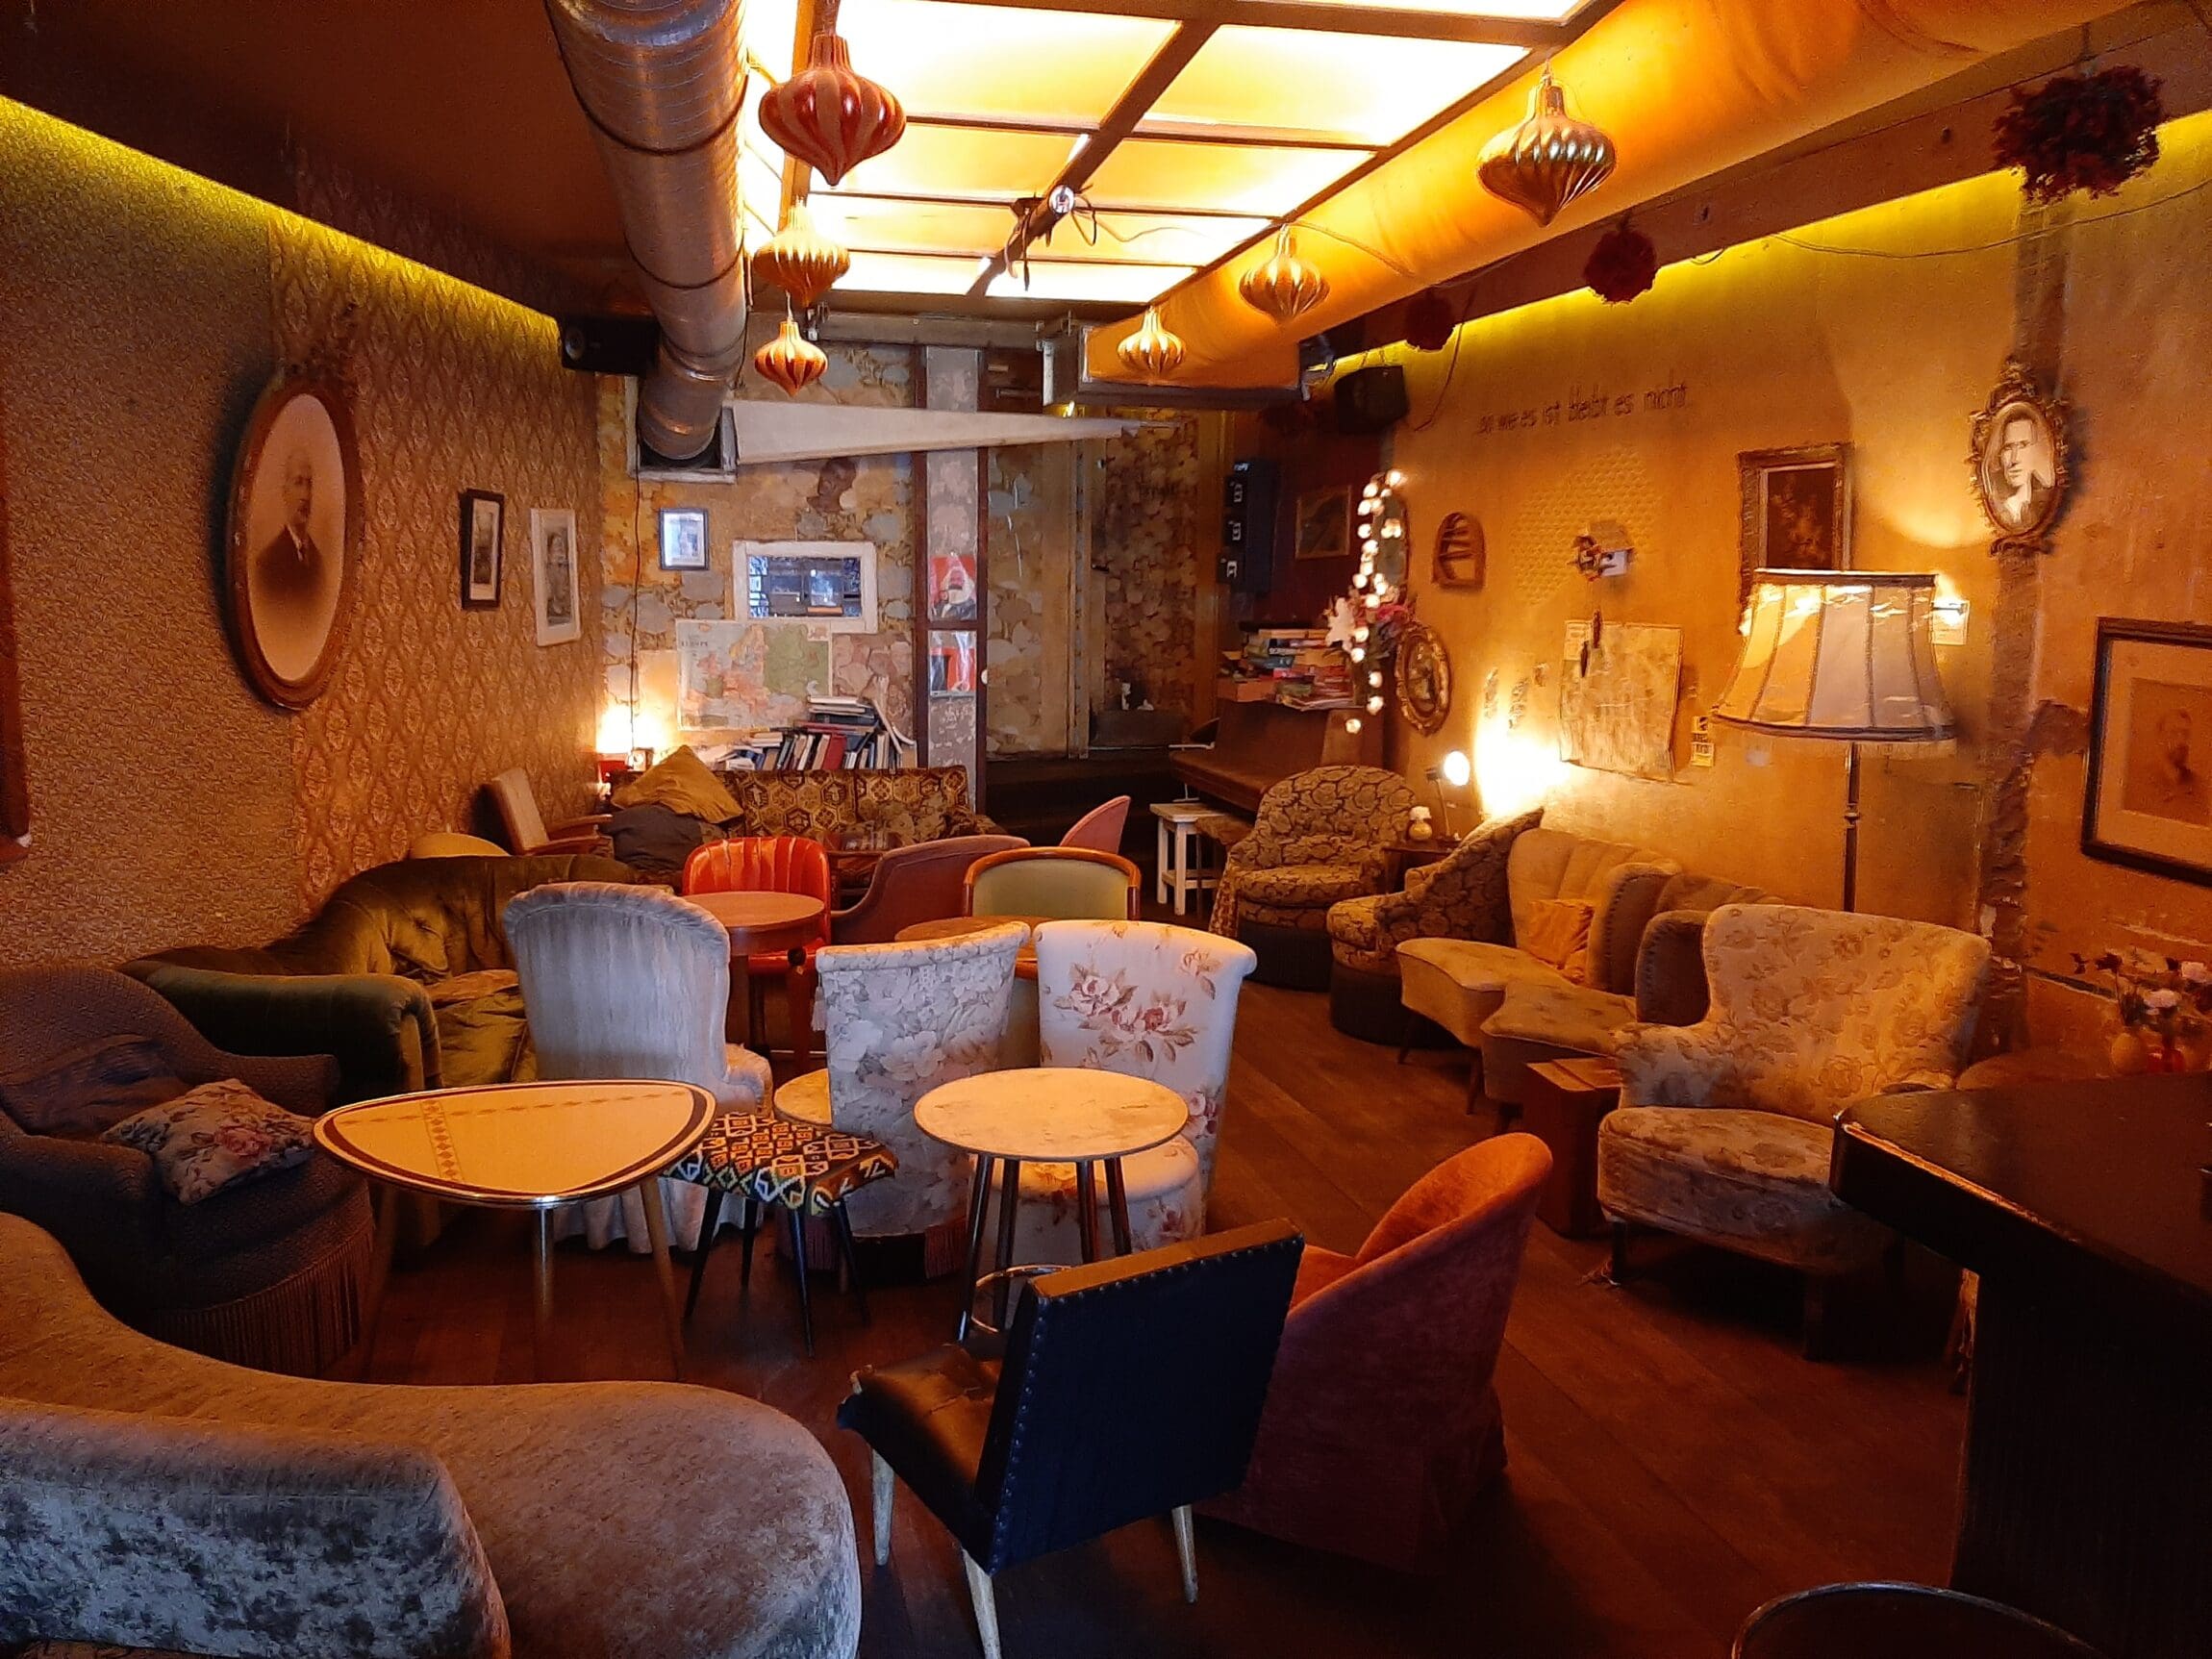 The best bars in Amsterdam | Cafe Brecht has various pattered chairs with a yellow and wallpaper background.